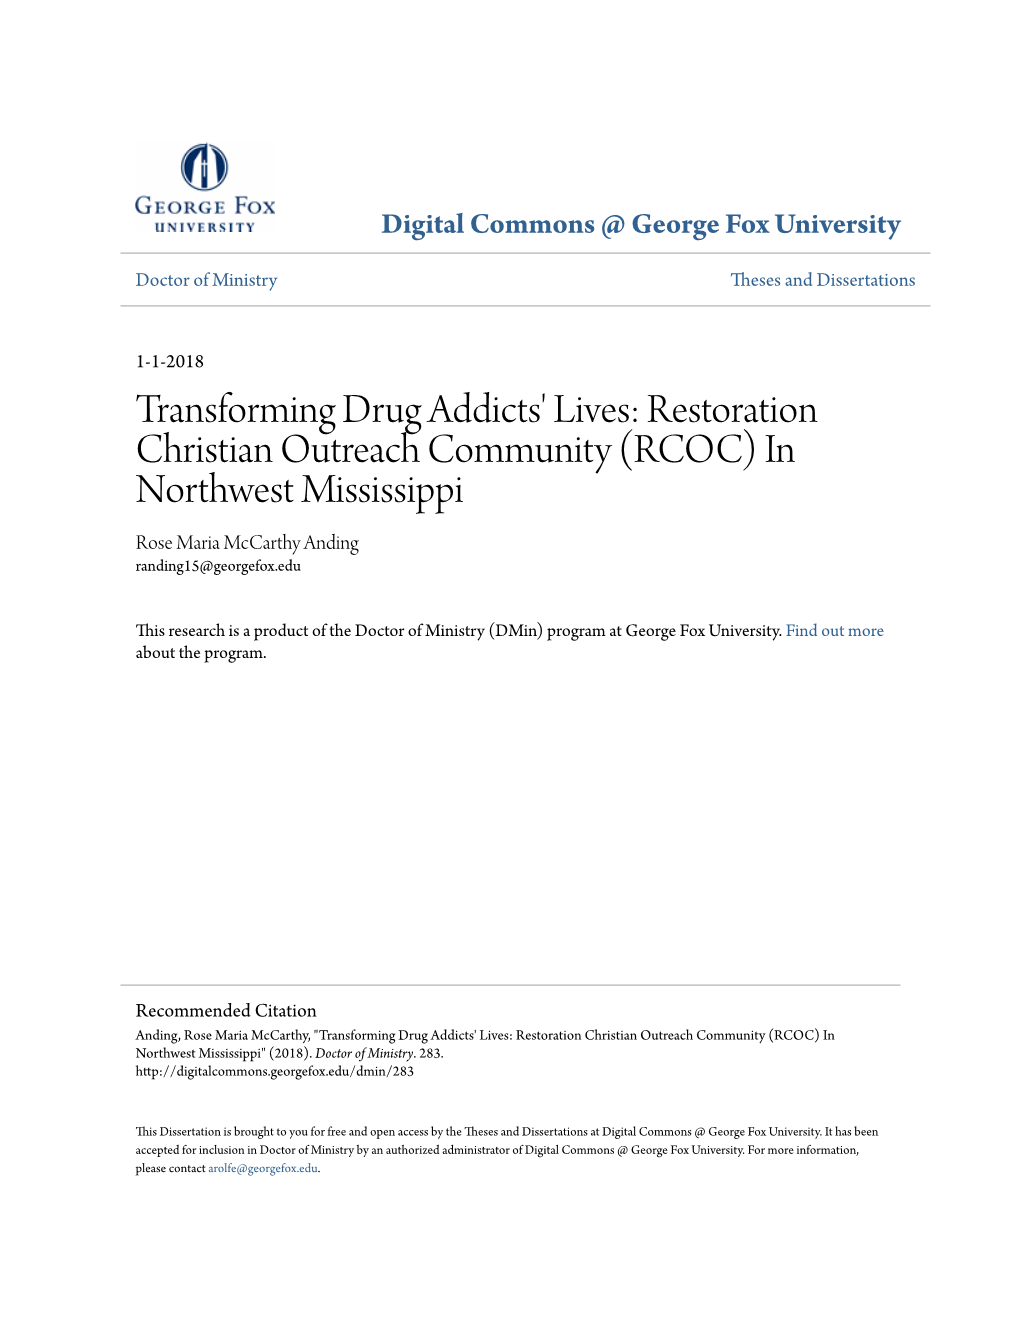 Transforming Drug Addicts' Lives: Restoration Christian Outreach Community (RCOC) in Northwest Mississippi Rose Maria Mccarthy Anding Randing15@Georgefox.Edu